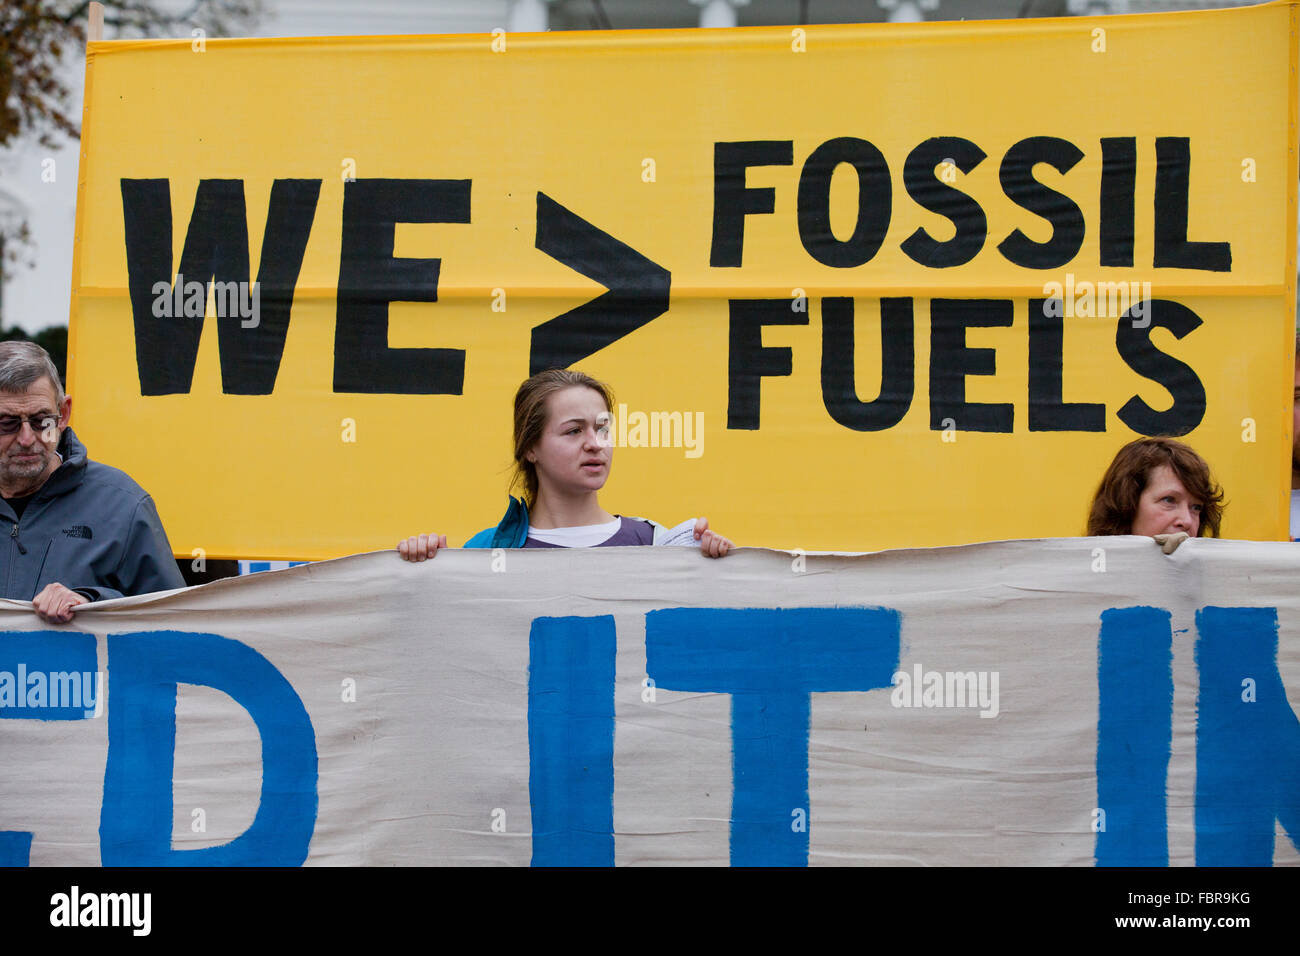 November 21, 2015, Washington, DC USA: Environmental activists protest in front of the White House Stock Photo